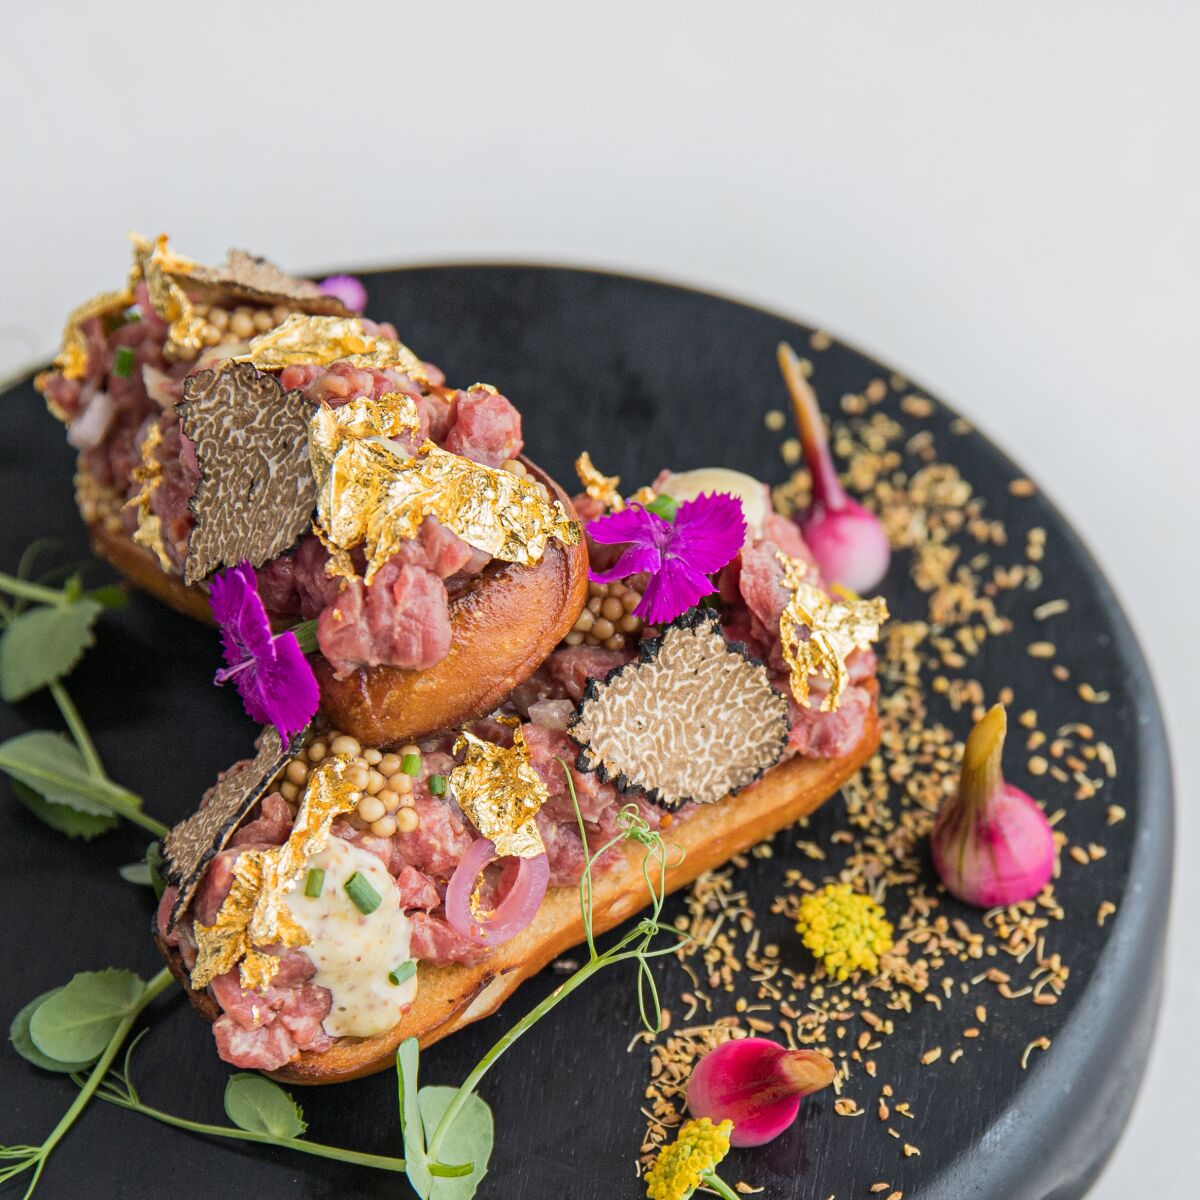 Beef tartare with black truffle and edible gold leaf on a baguette is on the menu at the Lounge at The Marine Room.